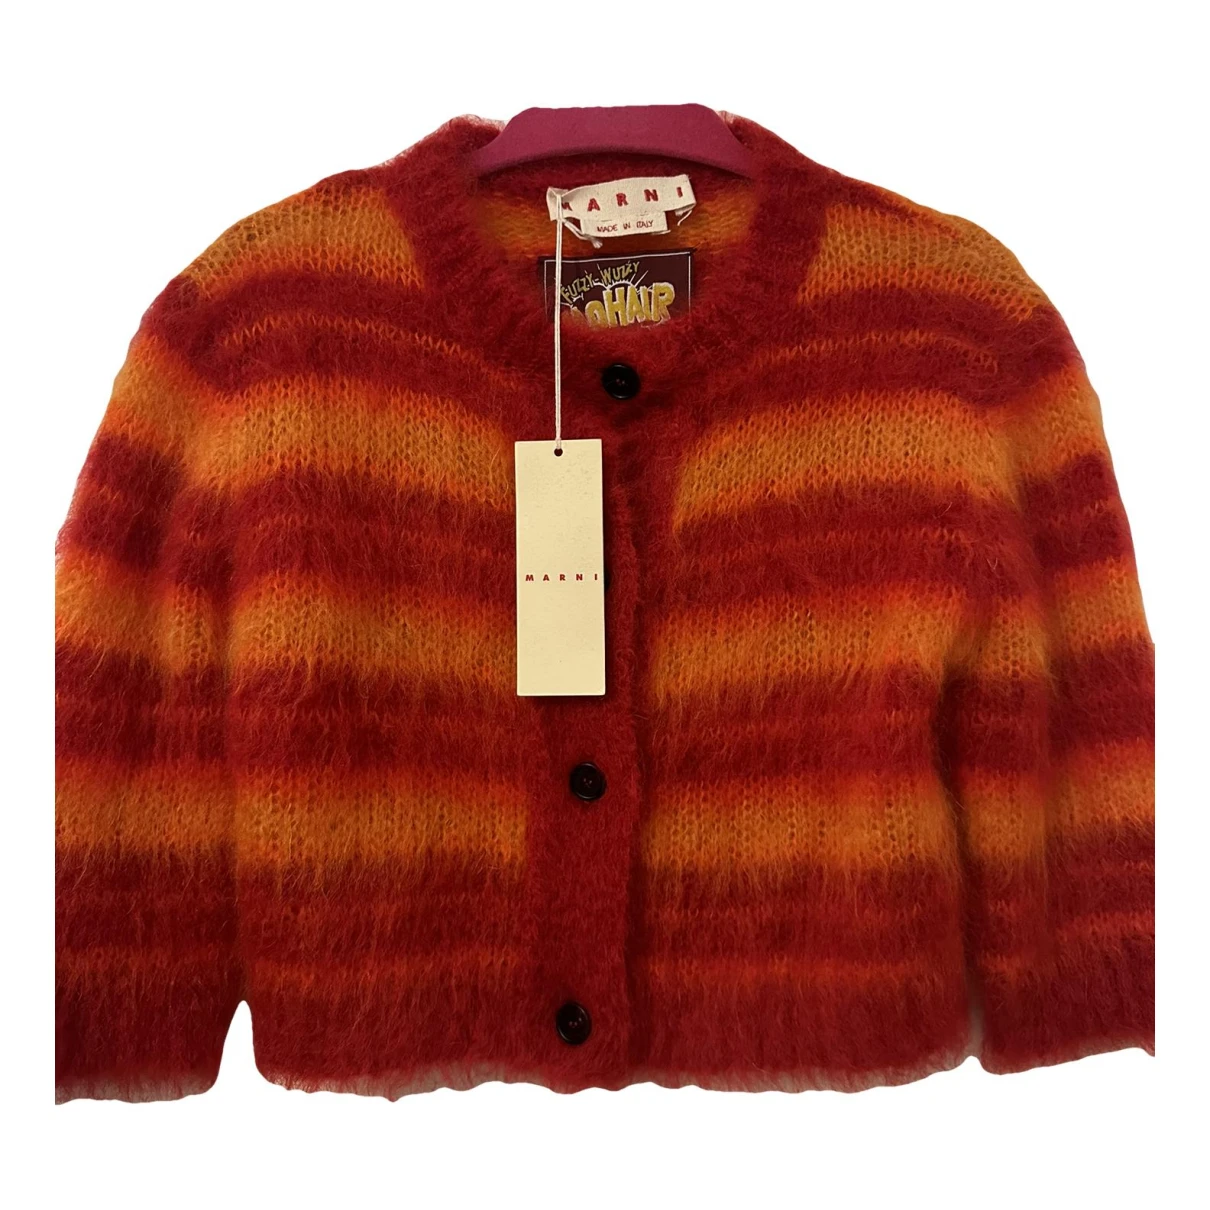 Pre-owned Marni Wool Cardigan In Multicolour